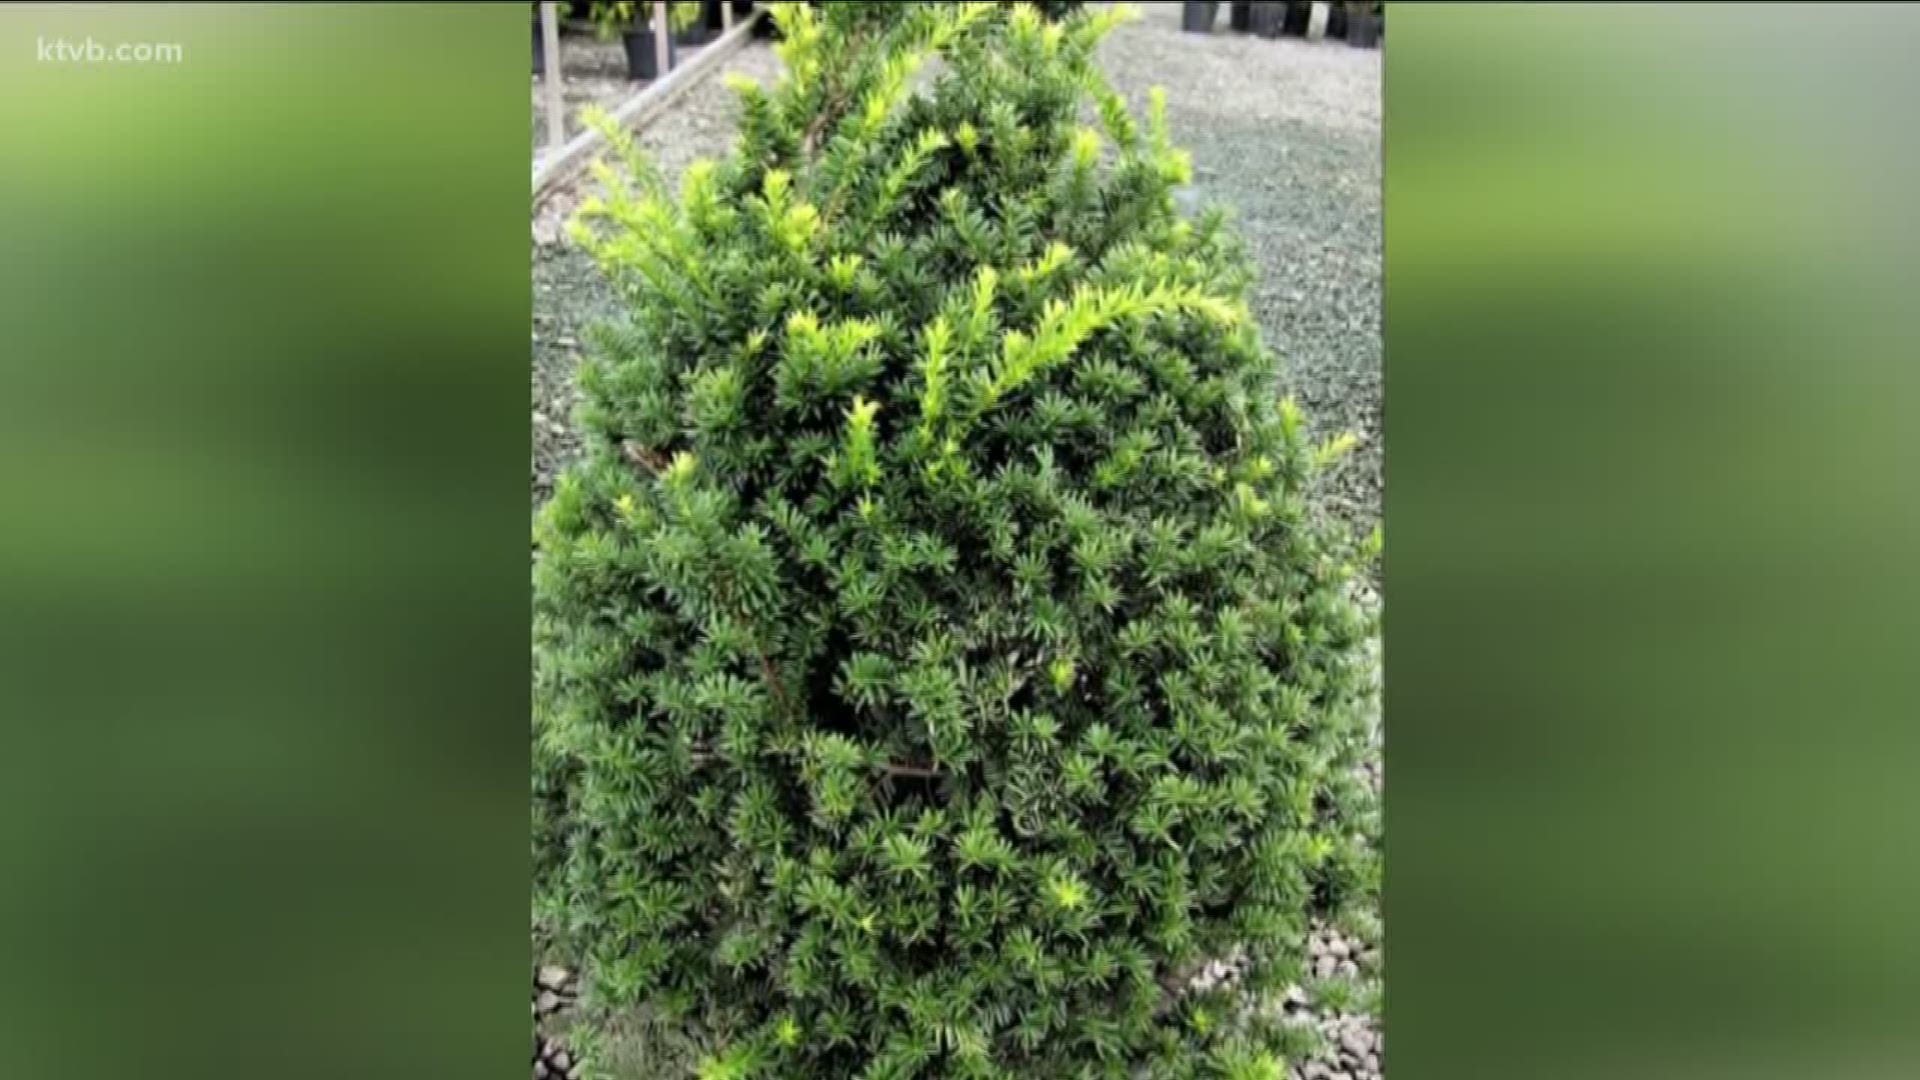 The Japanese yew plant can be deadly if eaten by animals.